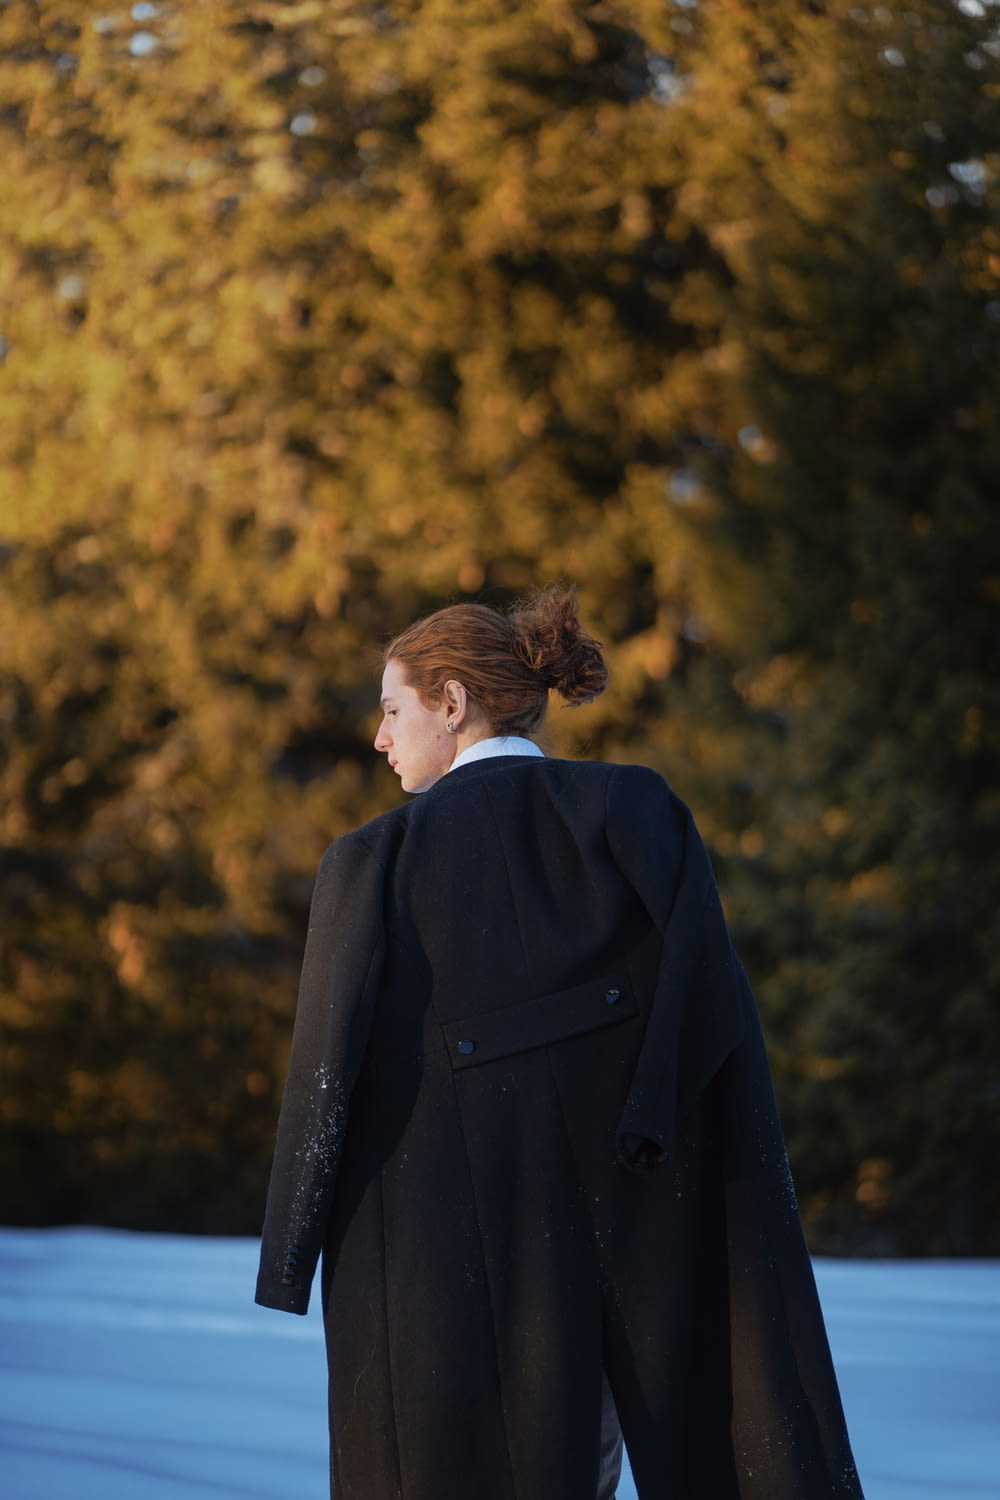 a woman in a black coat walking in the snow